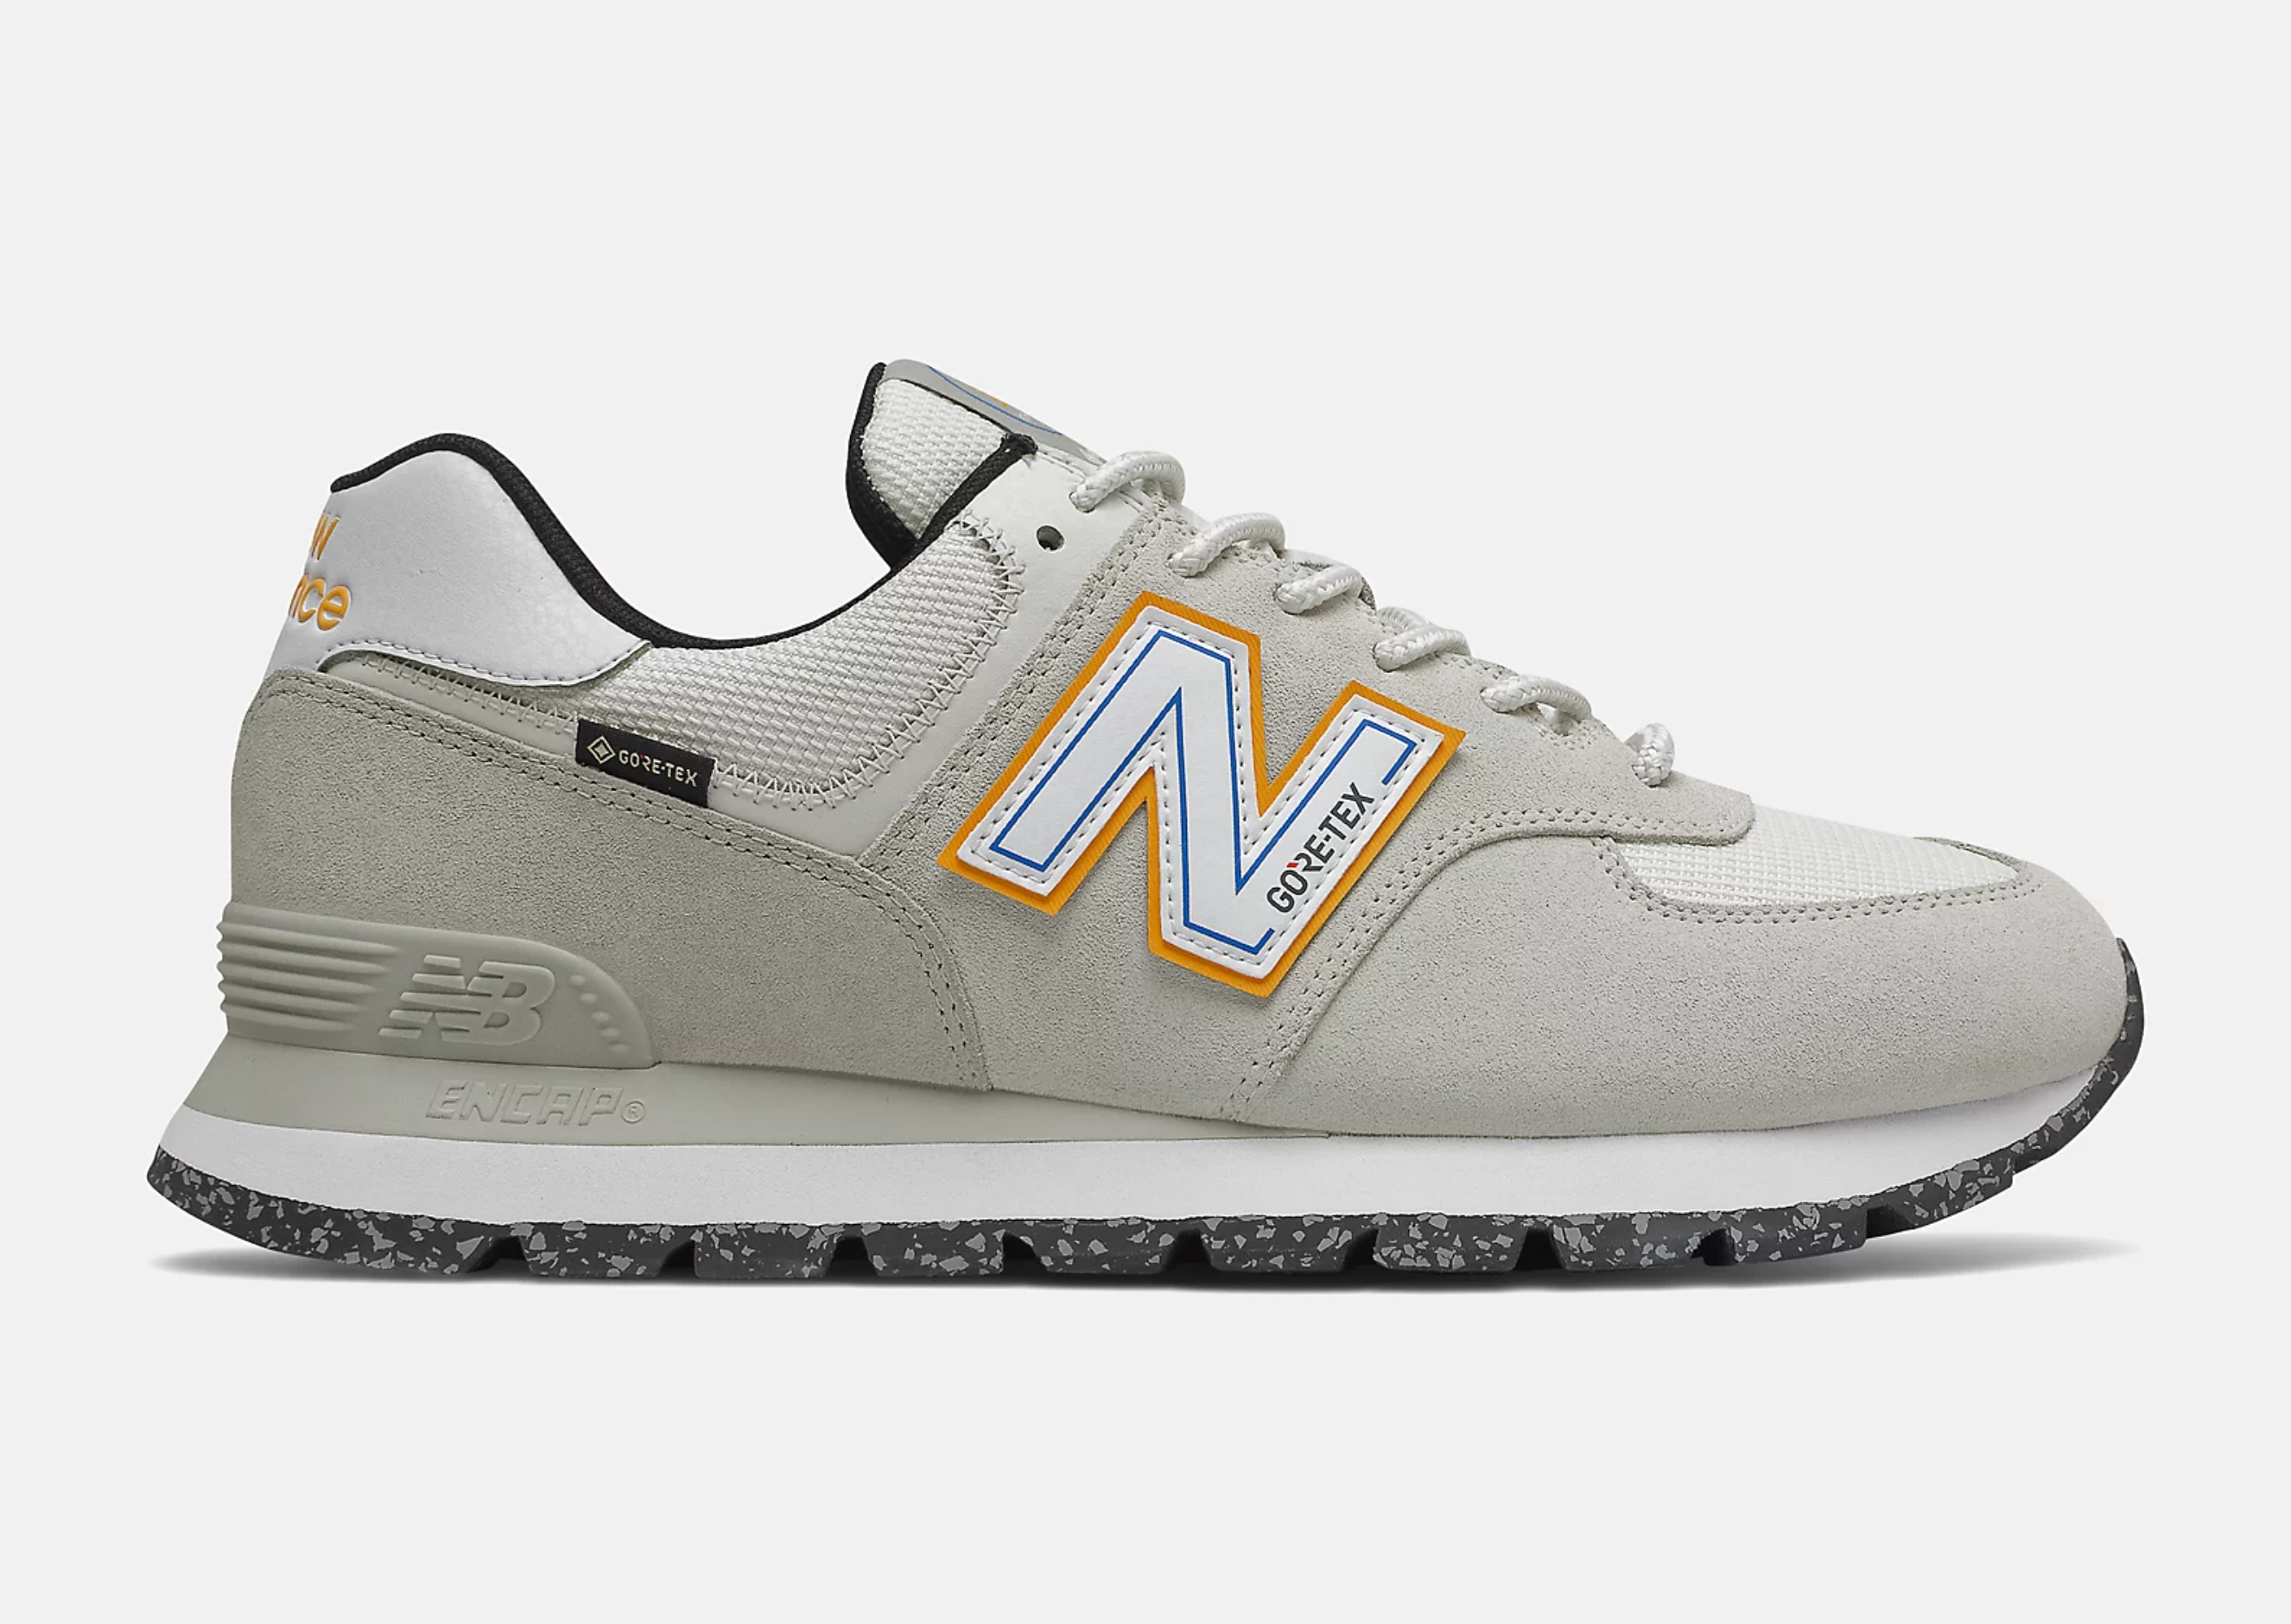 Herself Hurry up Applicant The New Balance 574 Gets Infused with GORE-TEX - Sneaker Freaker